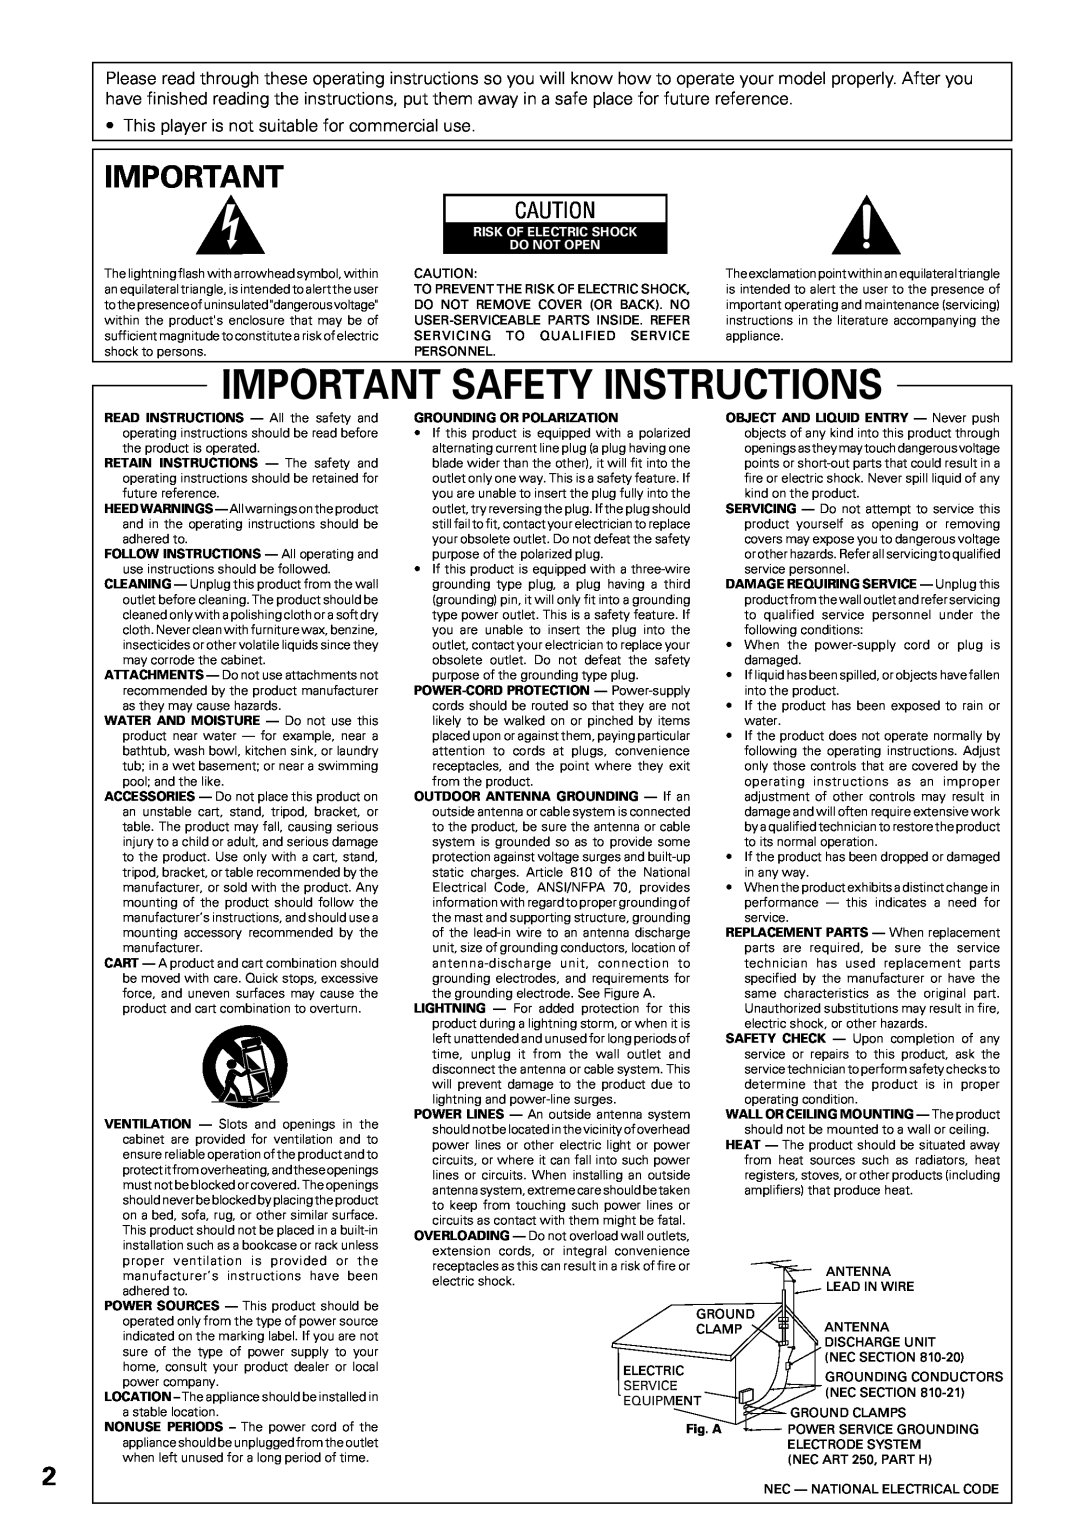 Pioneer DV-F07 operating instructions Important Safety Instructions, This player is not suitable for commercial use 